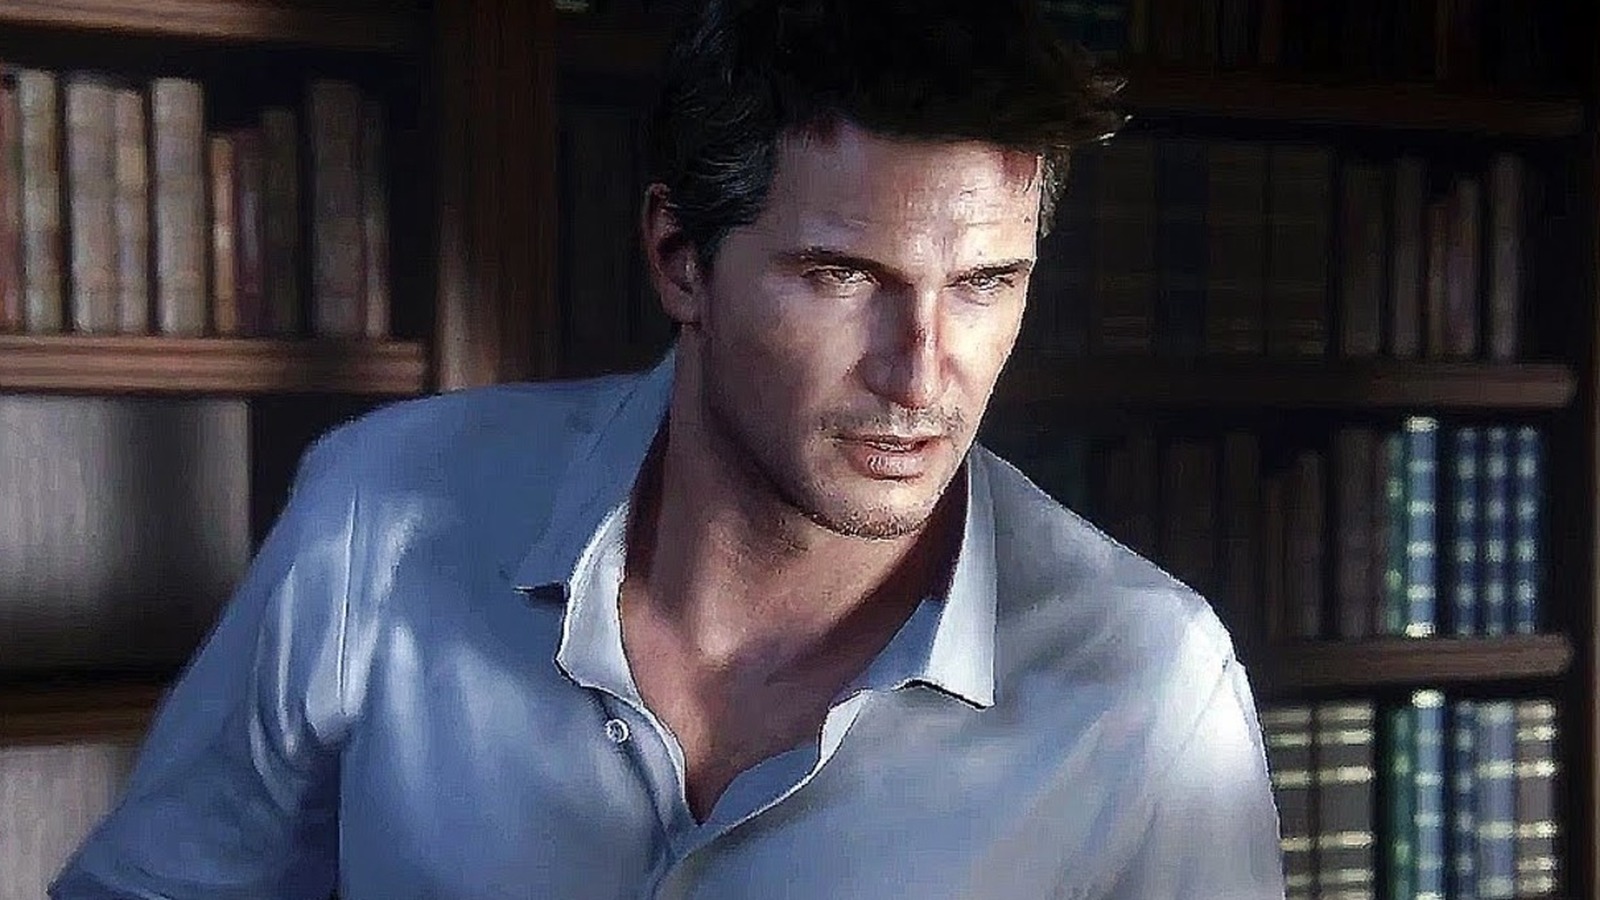 Nathan Drake from the Uncharted Series